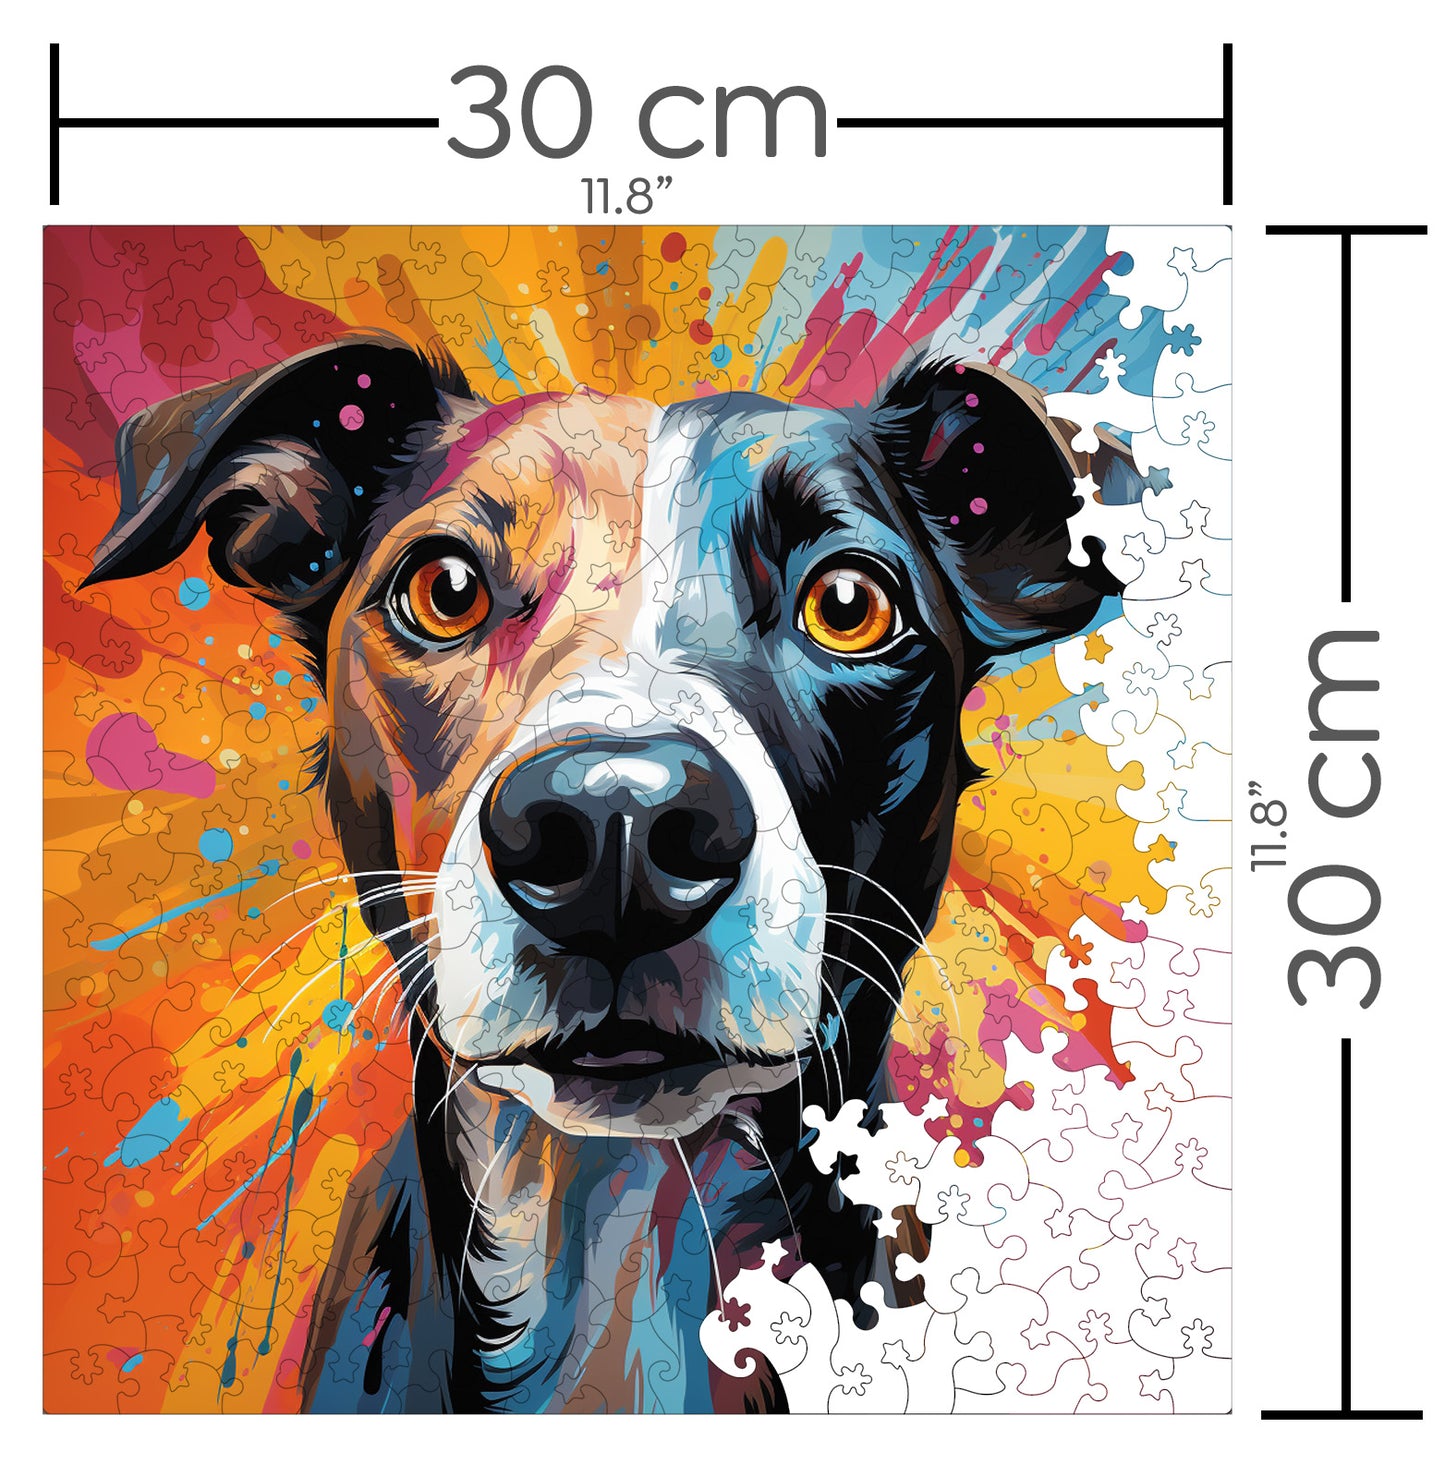 Puzzle cu Animale - Caini - Whippet 3 - 200 piese - 30 x 30 cm